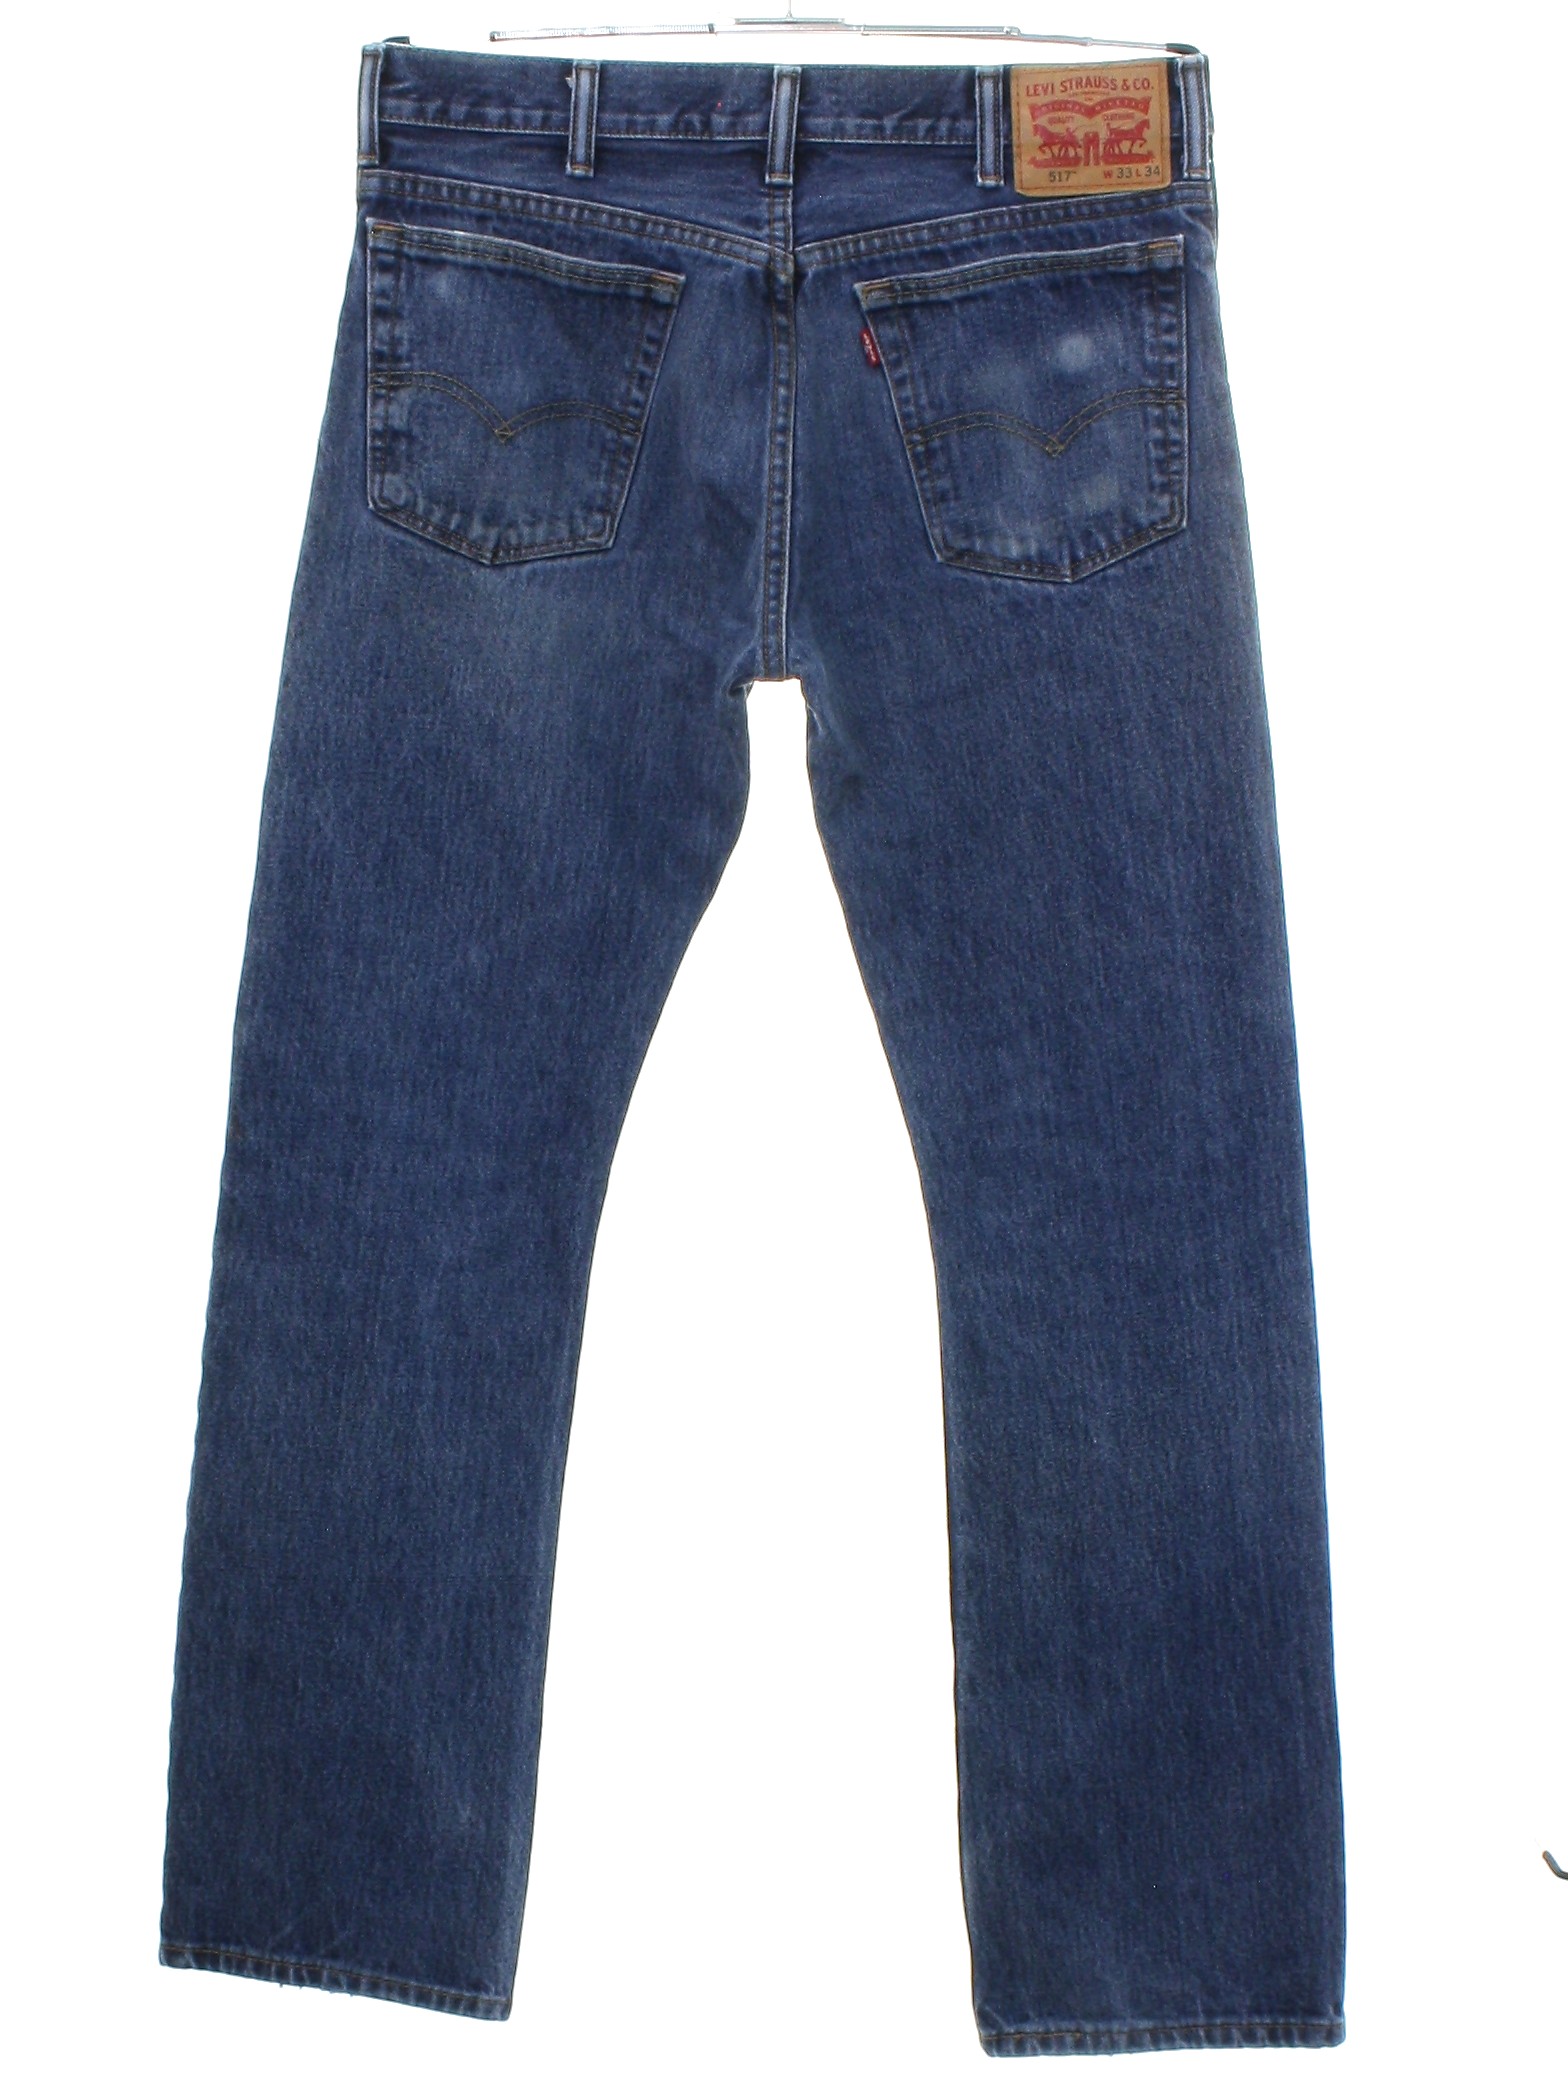 Pants: 90s -Levis 517- Mens slightly faded and worn blue cotton denim ...